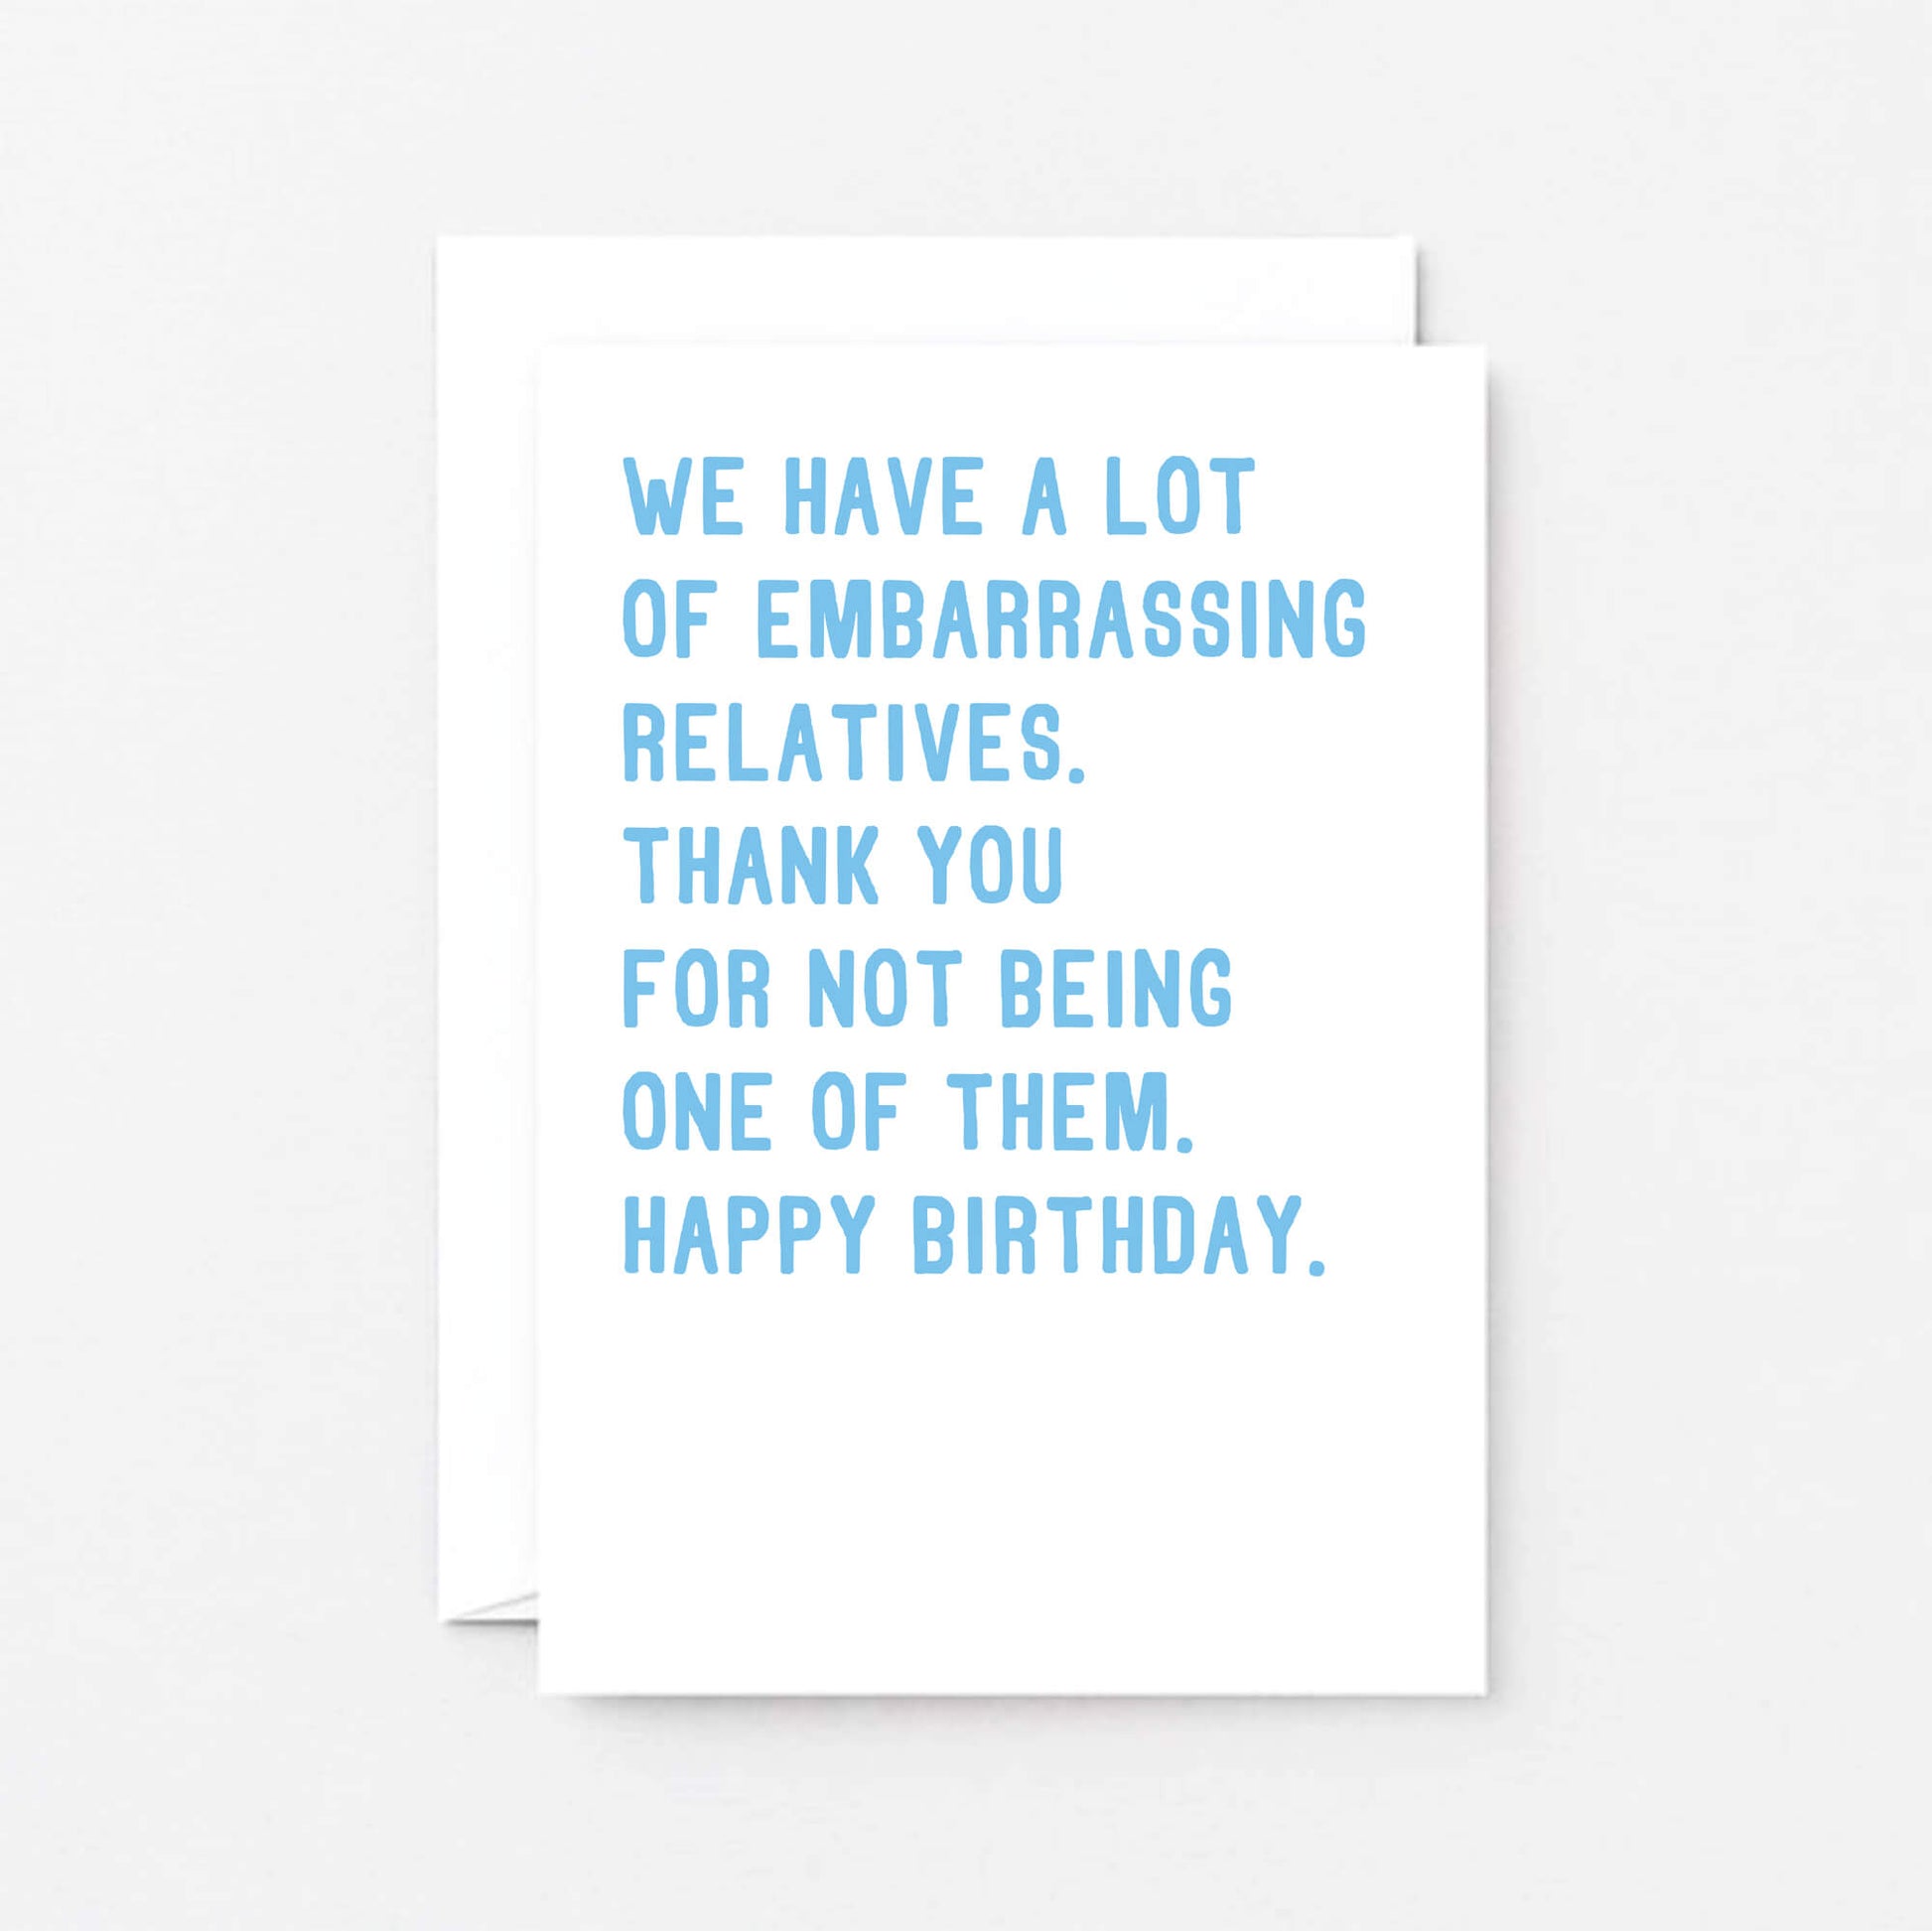 Funny Birthday Card by SixElevenCreations. Reads We have a lot of embarrassing relatives. Thank you for not being one of them. Happy birthday. Product Code SE2021A6